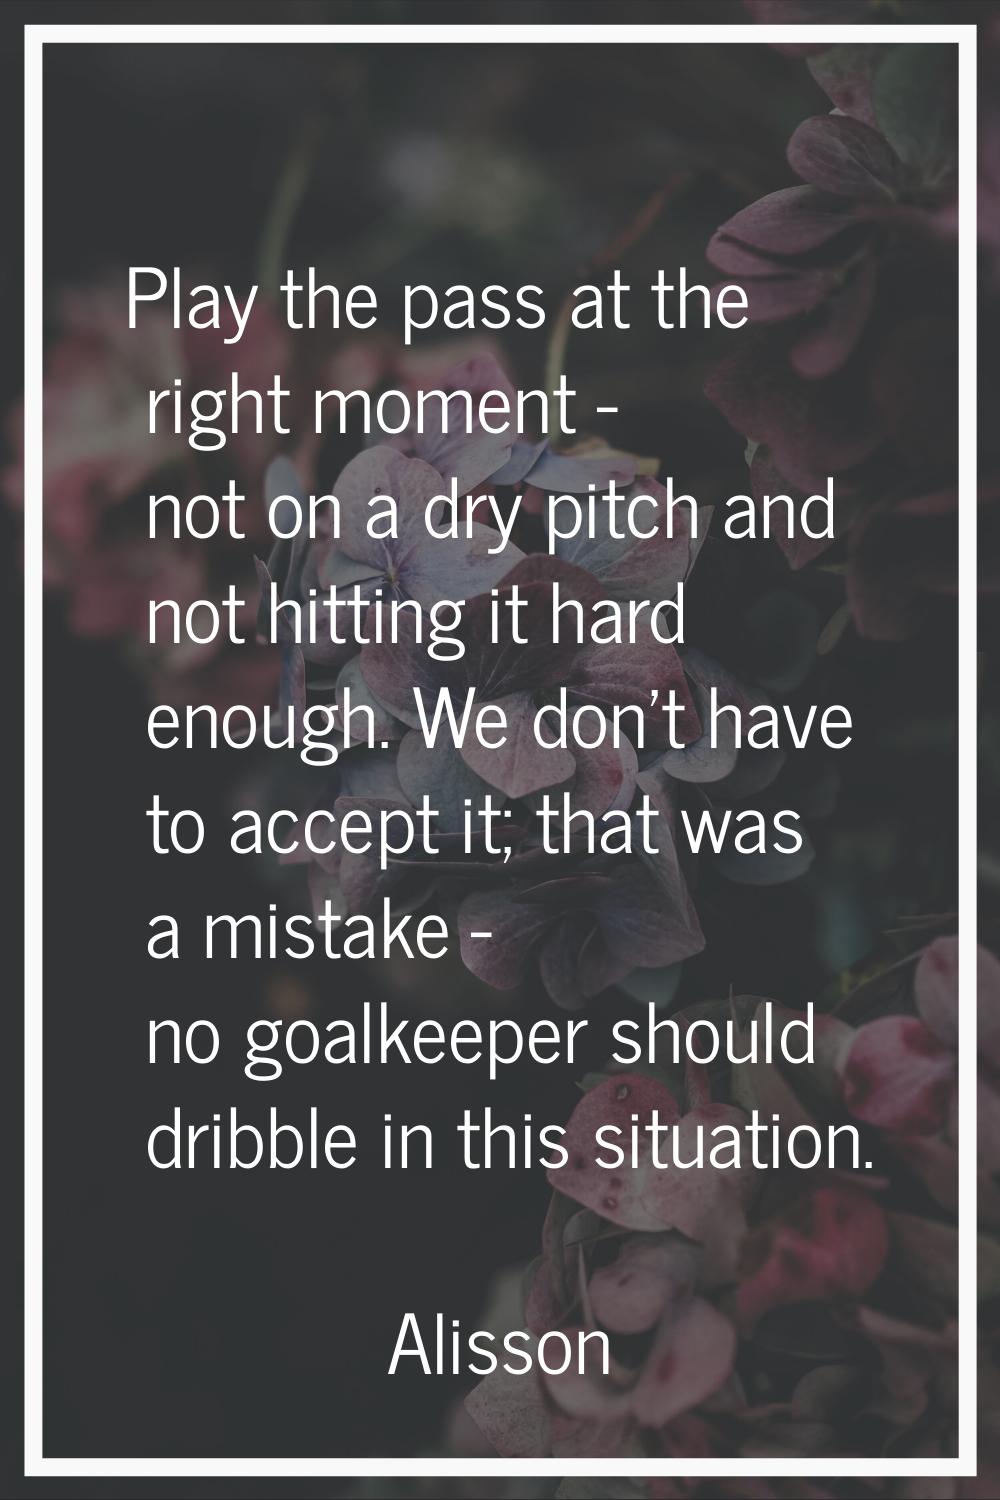 Play the pass at the right moment - not on a dry pitch and not hitting it hard enough. We don't hav